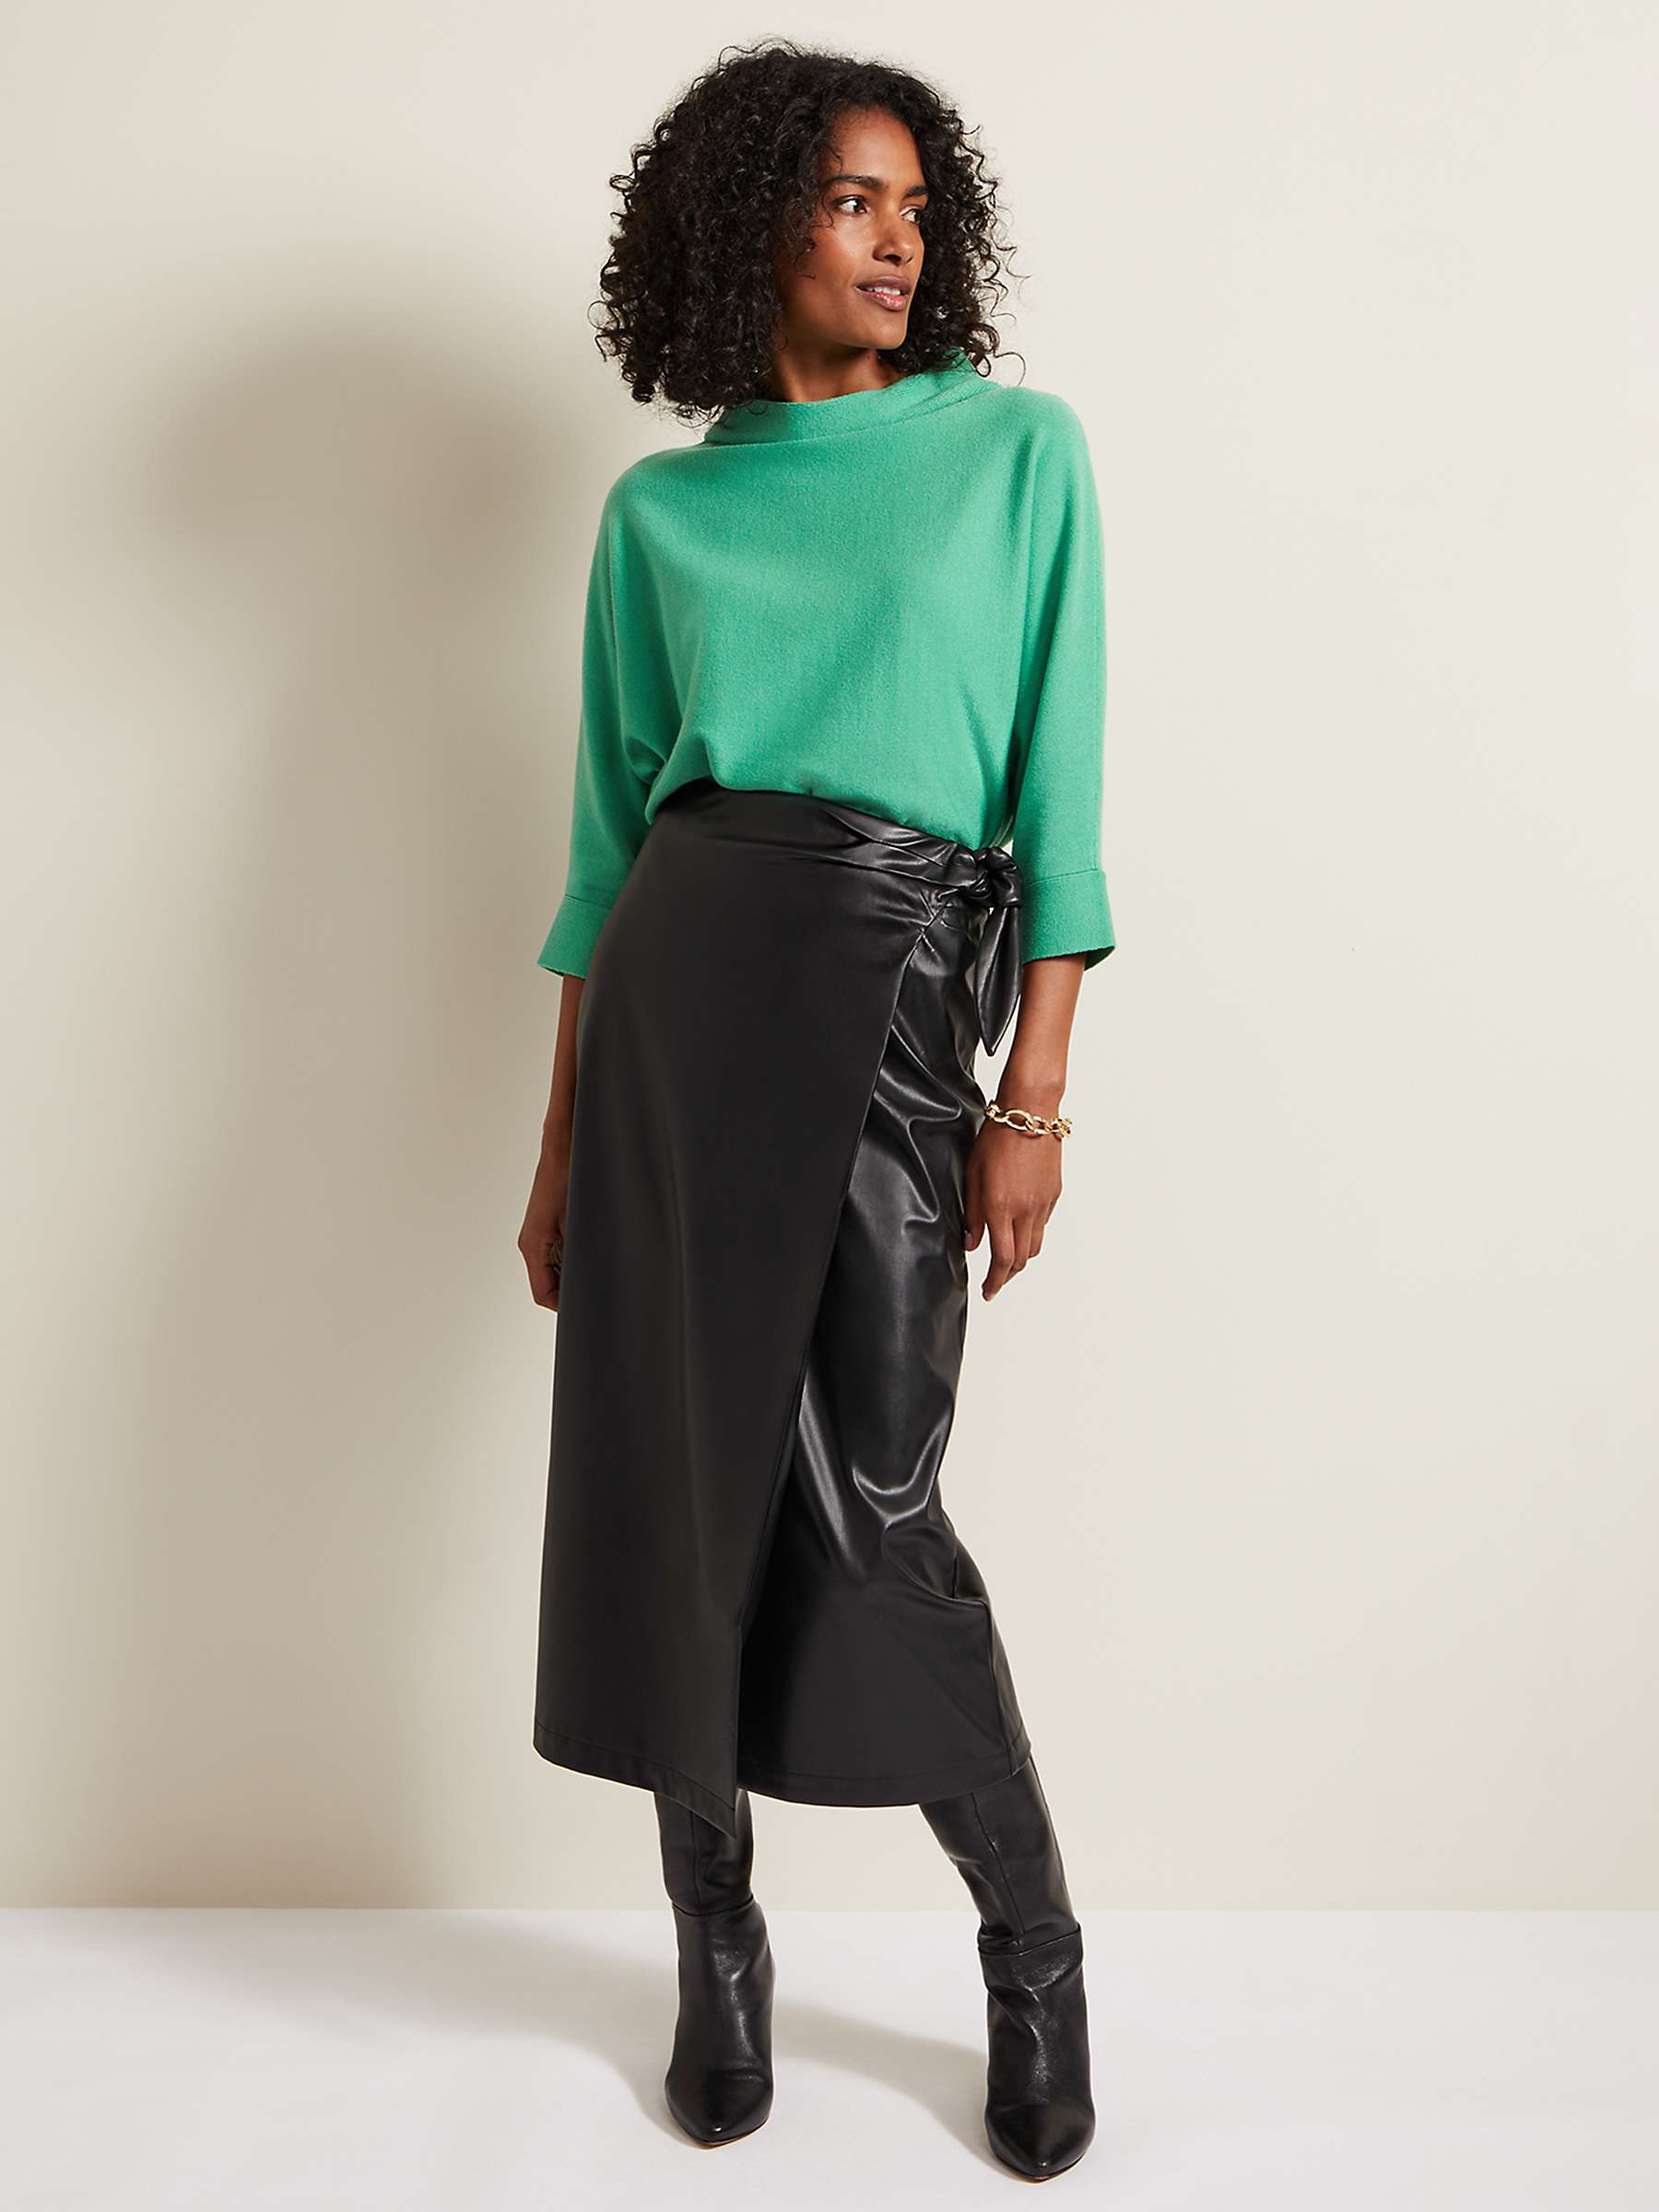 Buy Phase Eight Salima Jumper, Green Online at johnlewis.com